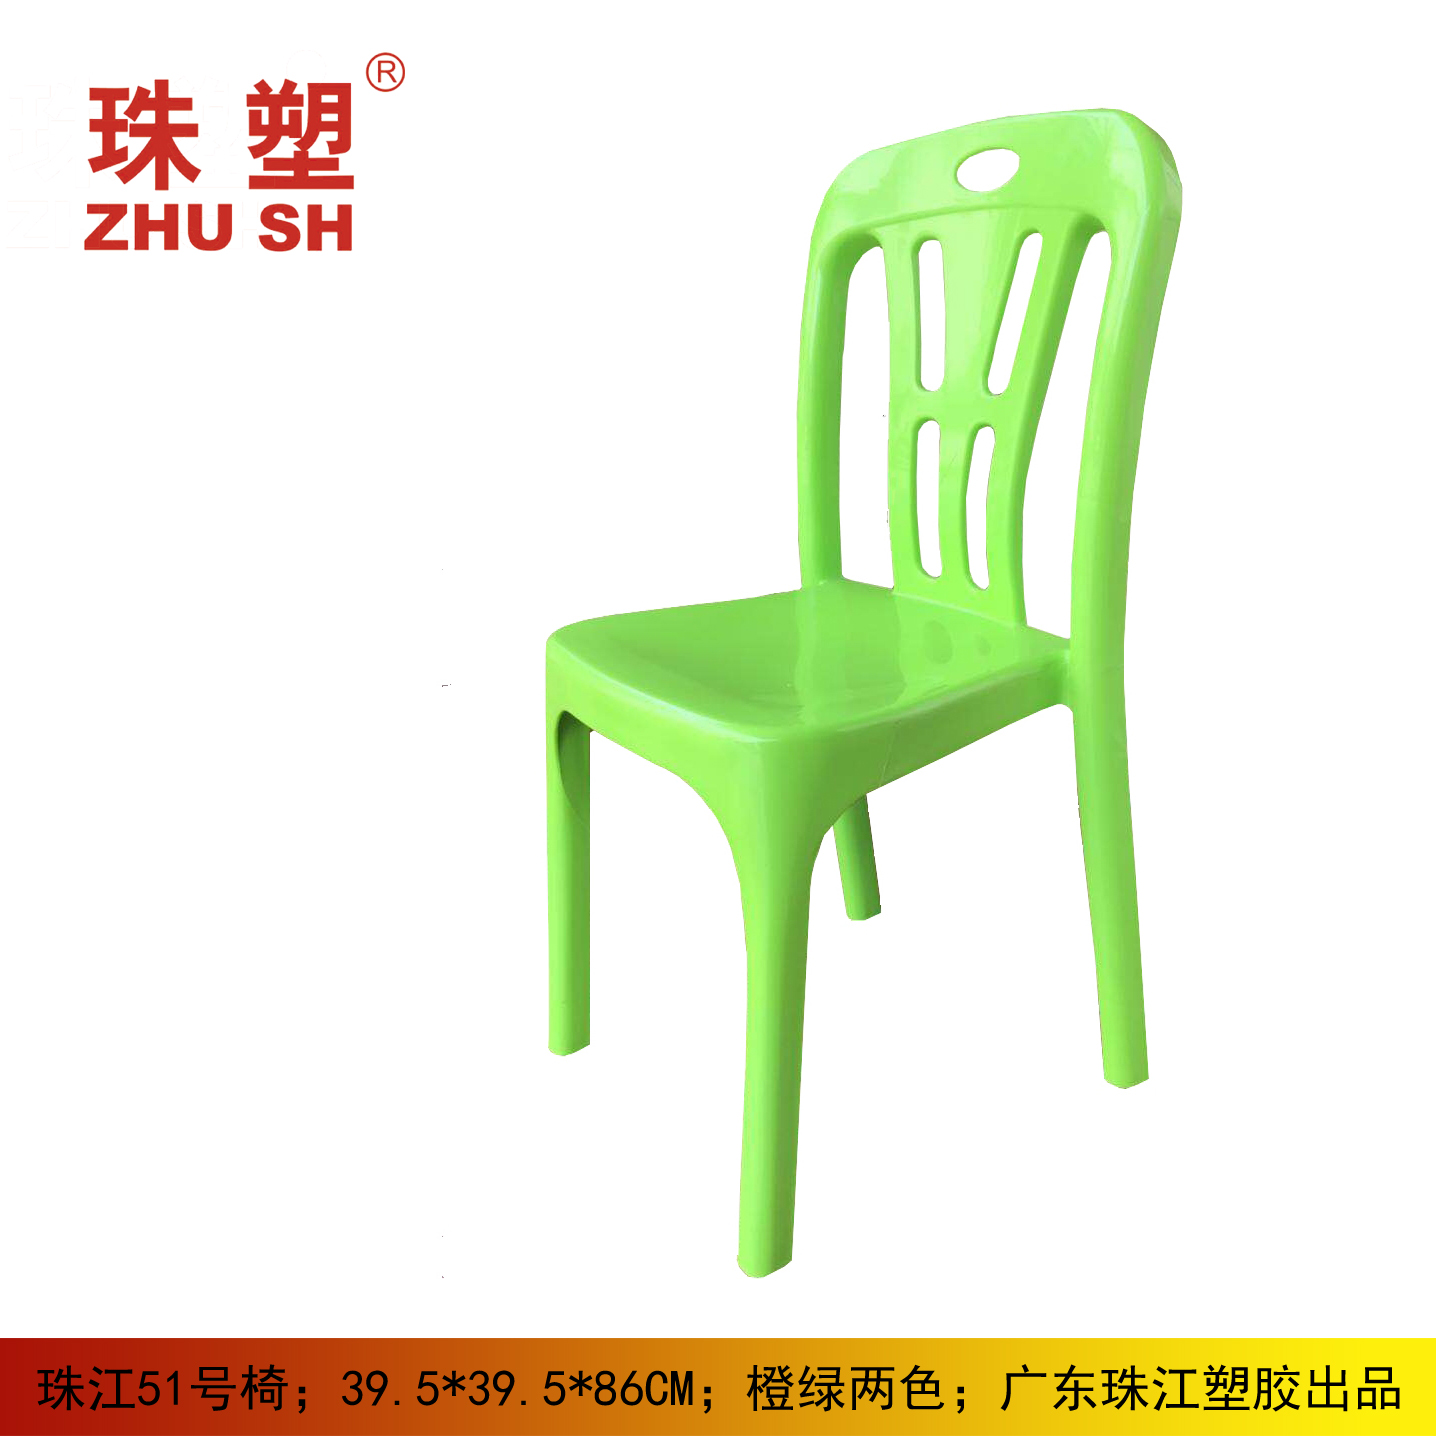 No.51 Dining chair